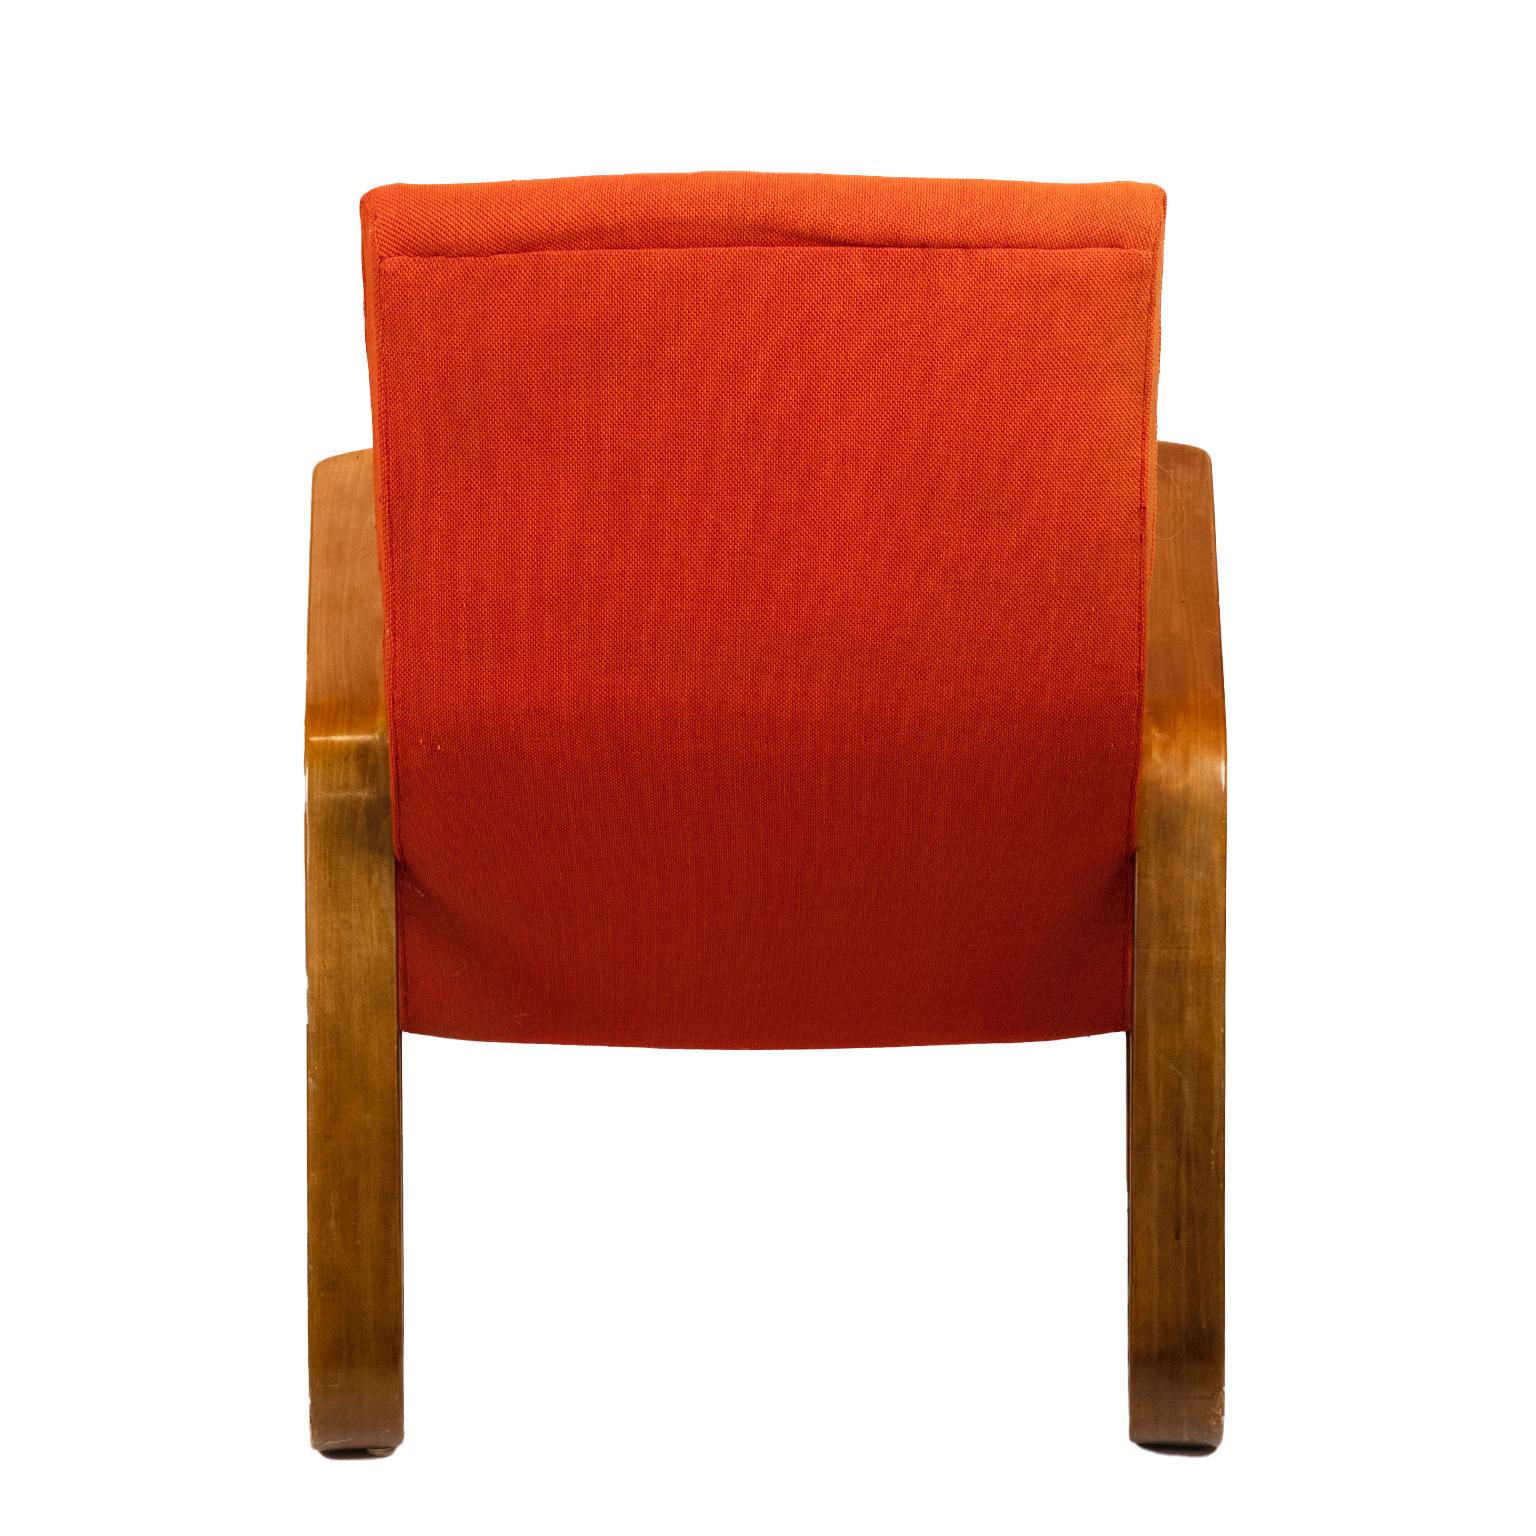 Mid-Century Modern Eero Saarinen for Knoll Upholstered Grasshopper Chair and Footstool For Sale